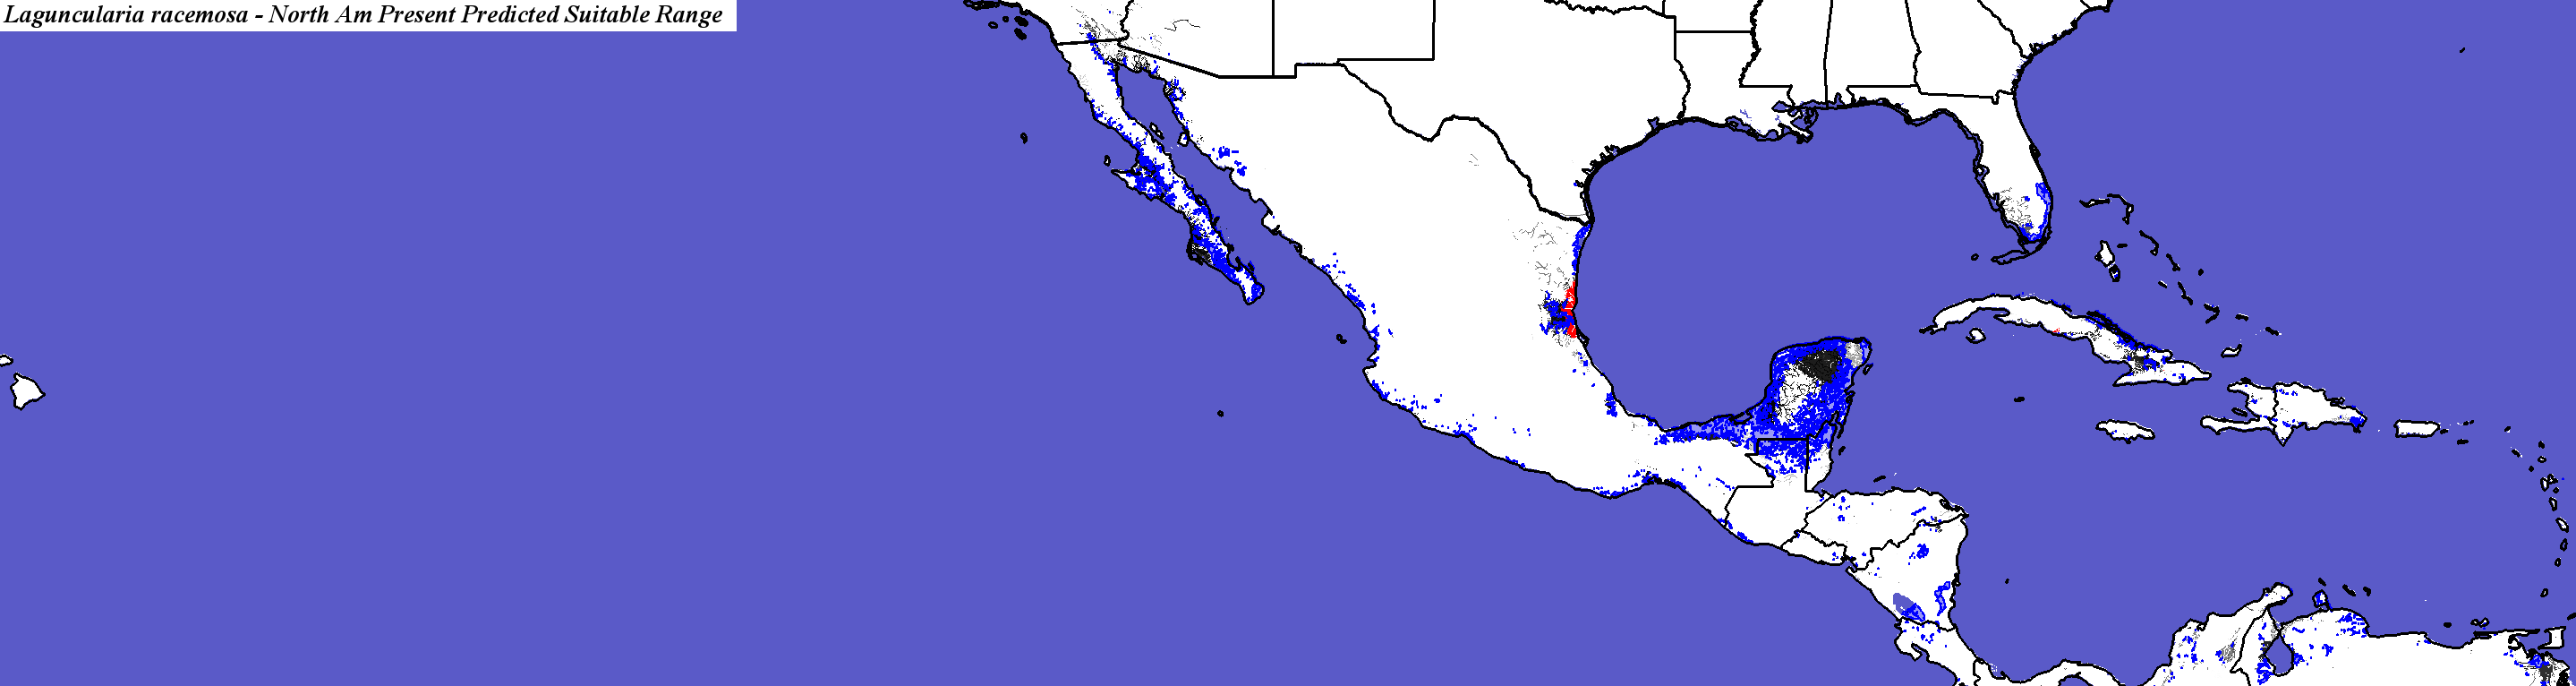 Hargroves Present Suitable Range Outline for Laguncularia_racemosa_final